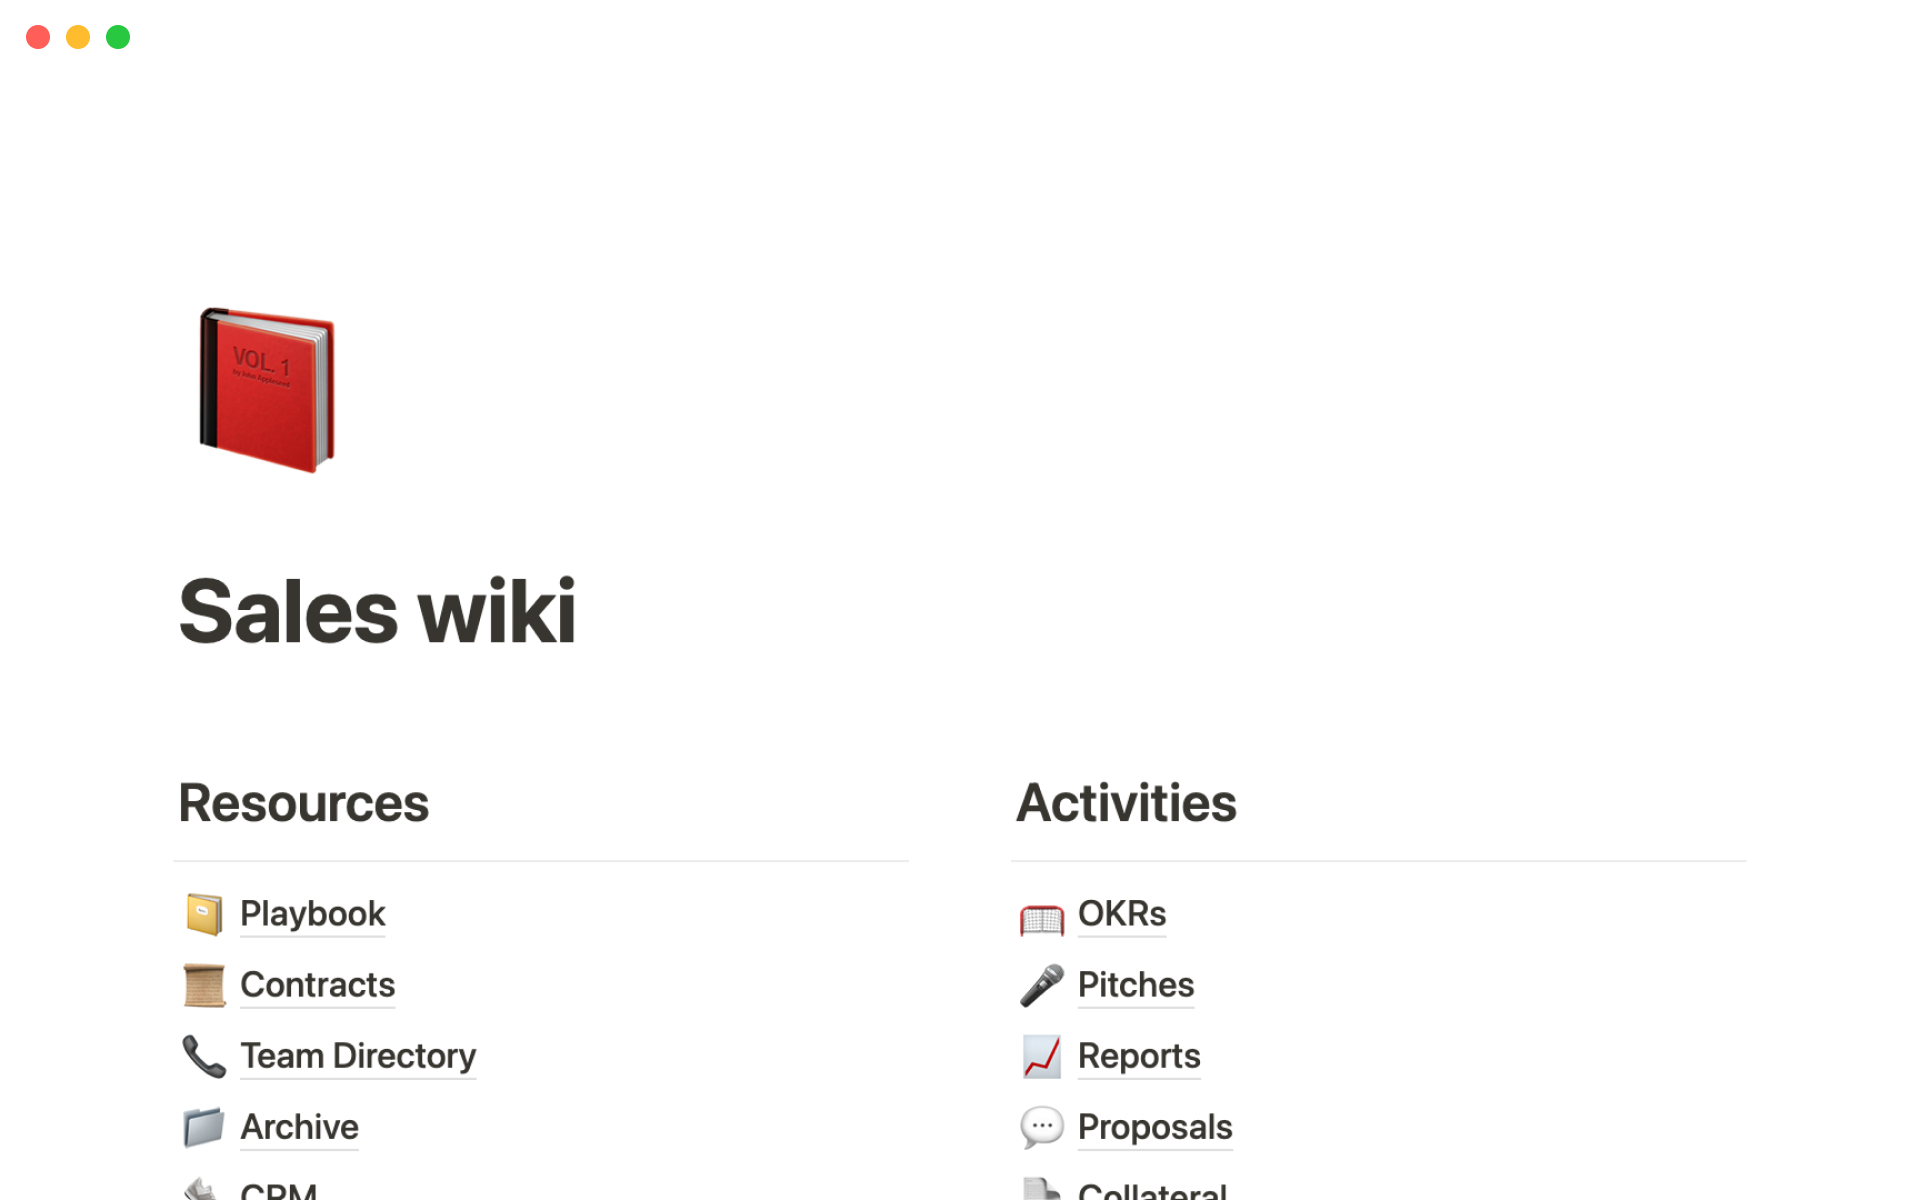 The desktop image for the Sales wiki template